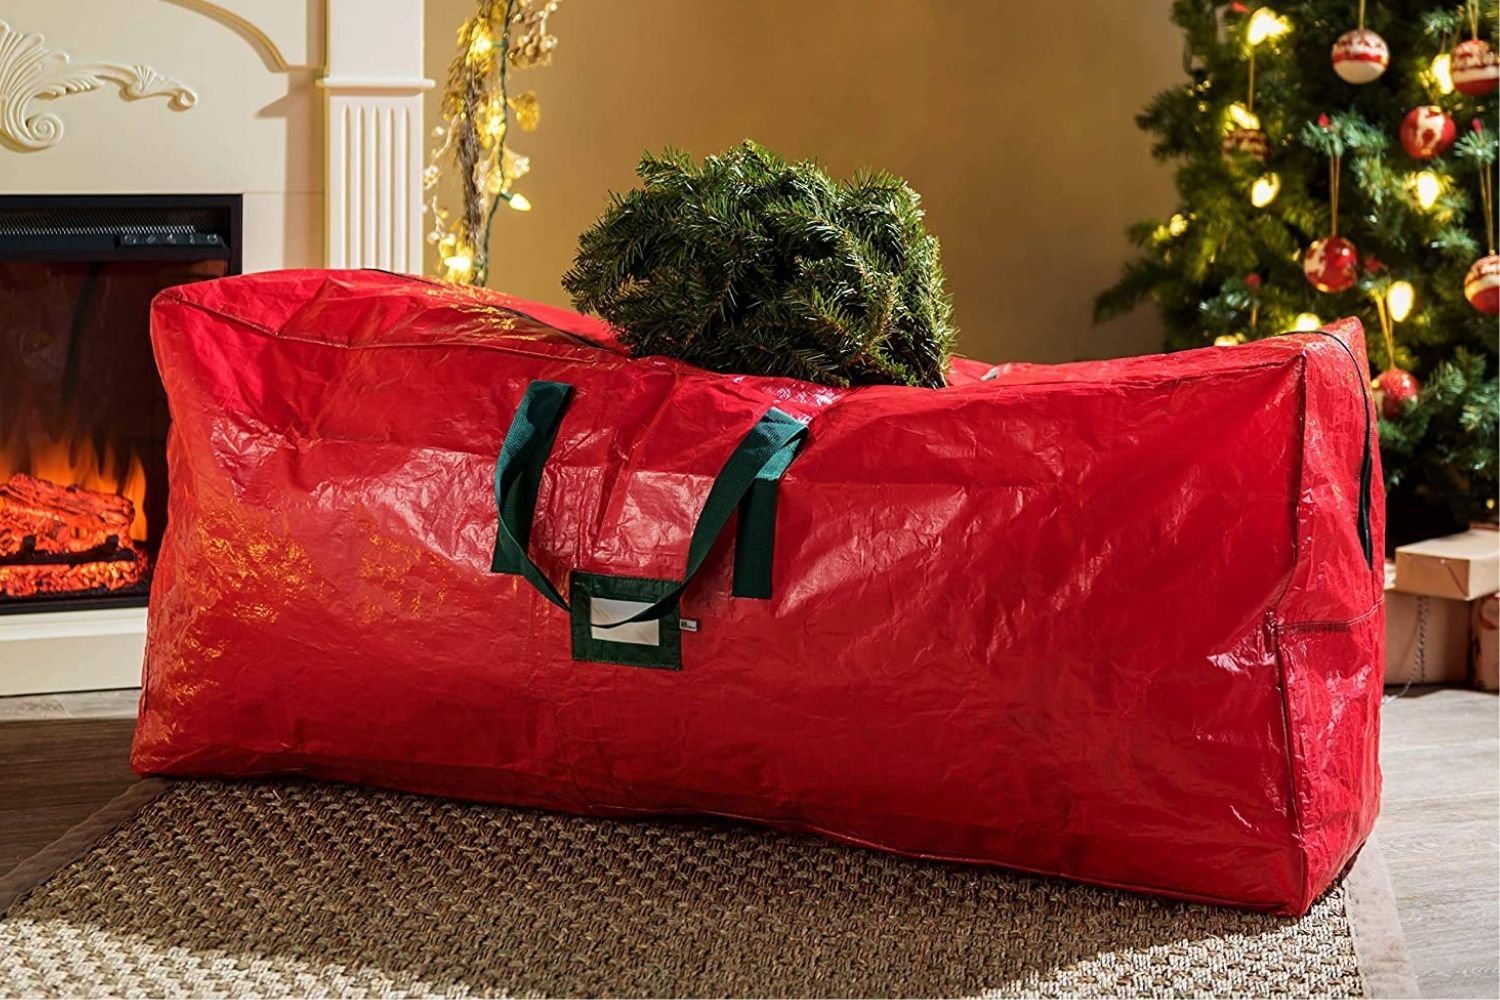 How To Store Christmas Tree In Garage